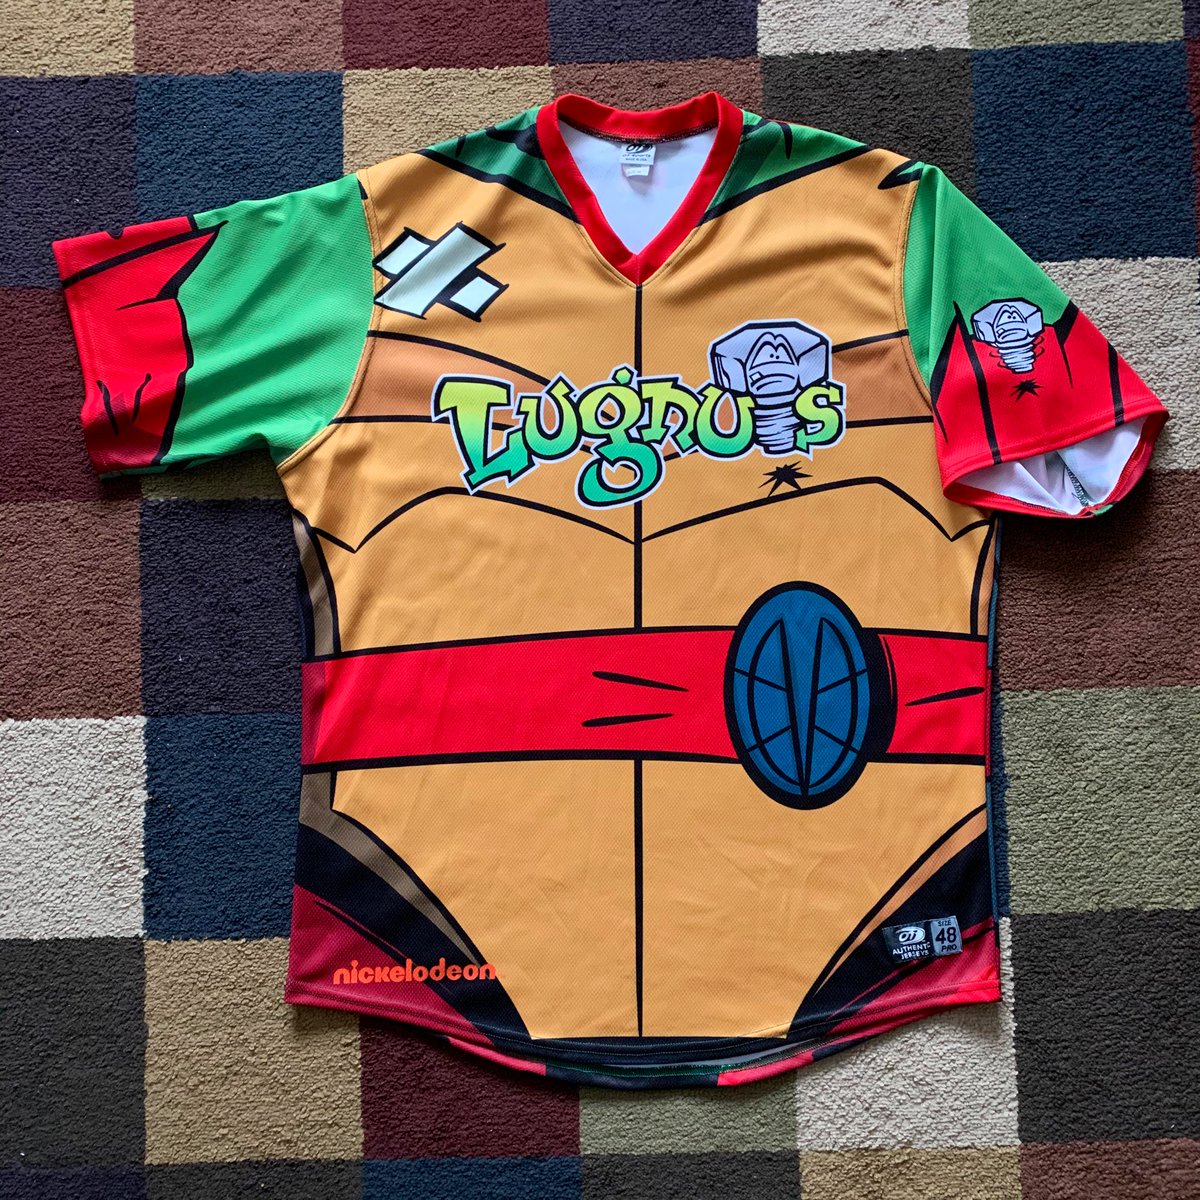 2019 TMNT Promo Night Jersey.Again, SUPER excited